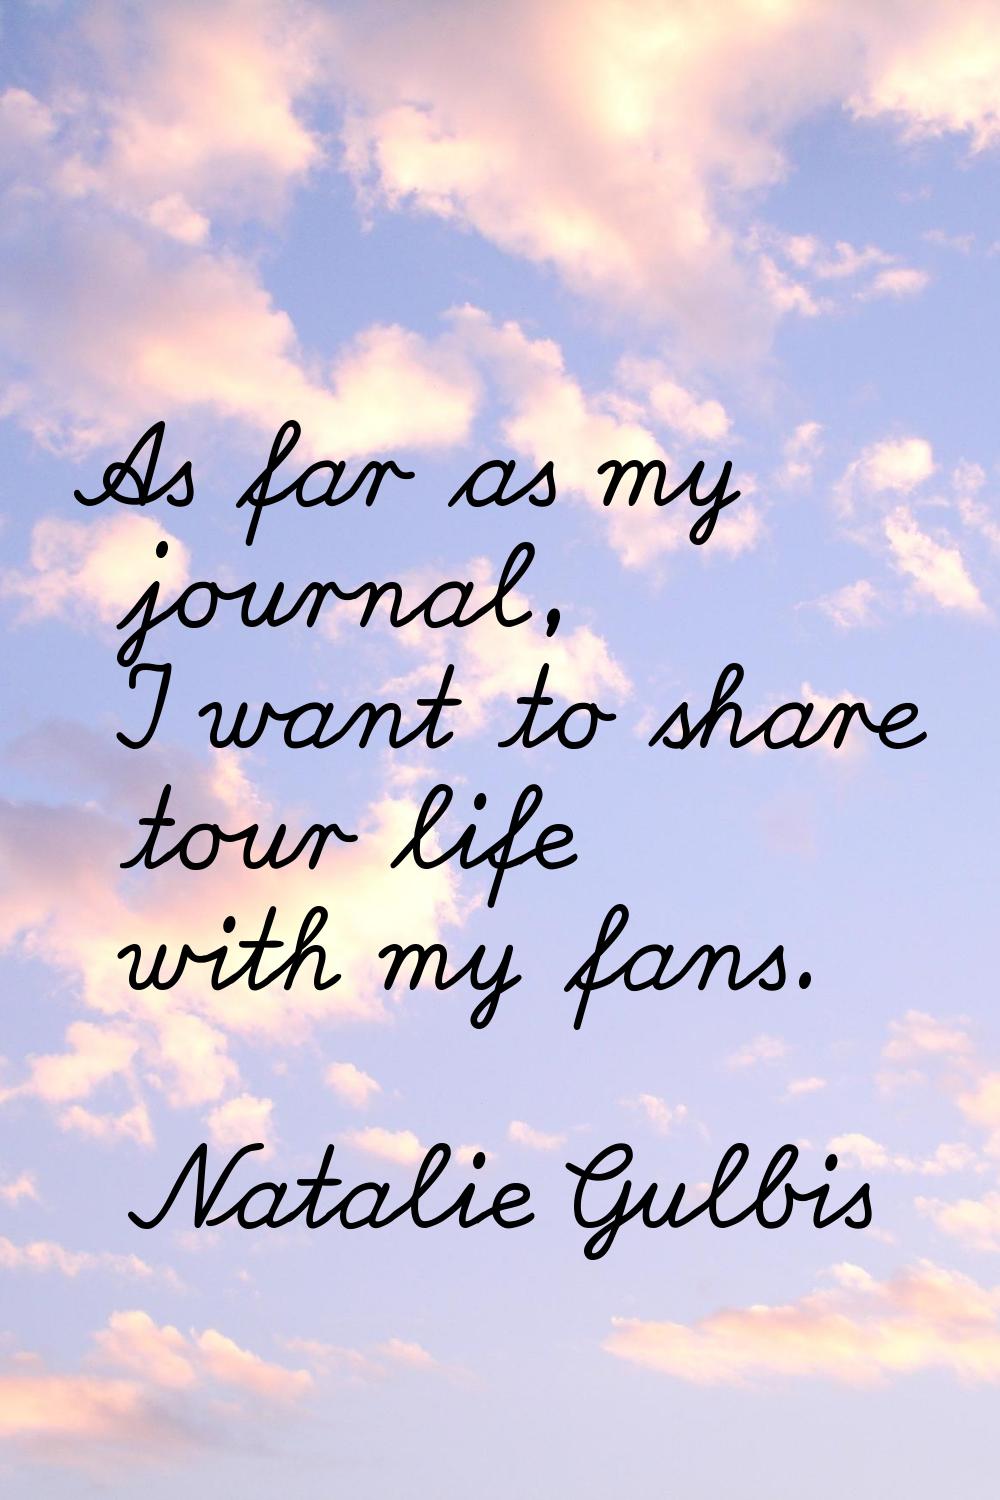 As far as my journal, I want to share tour life with my fans.